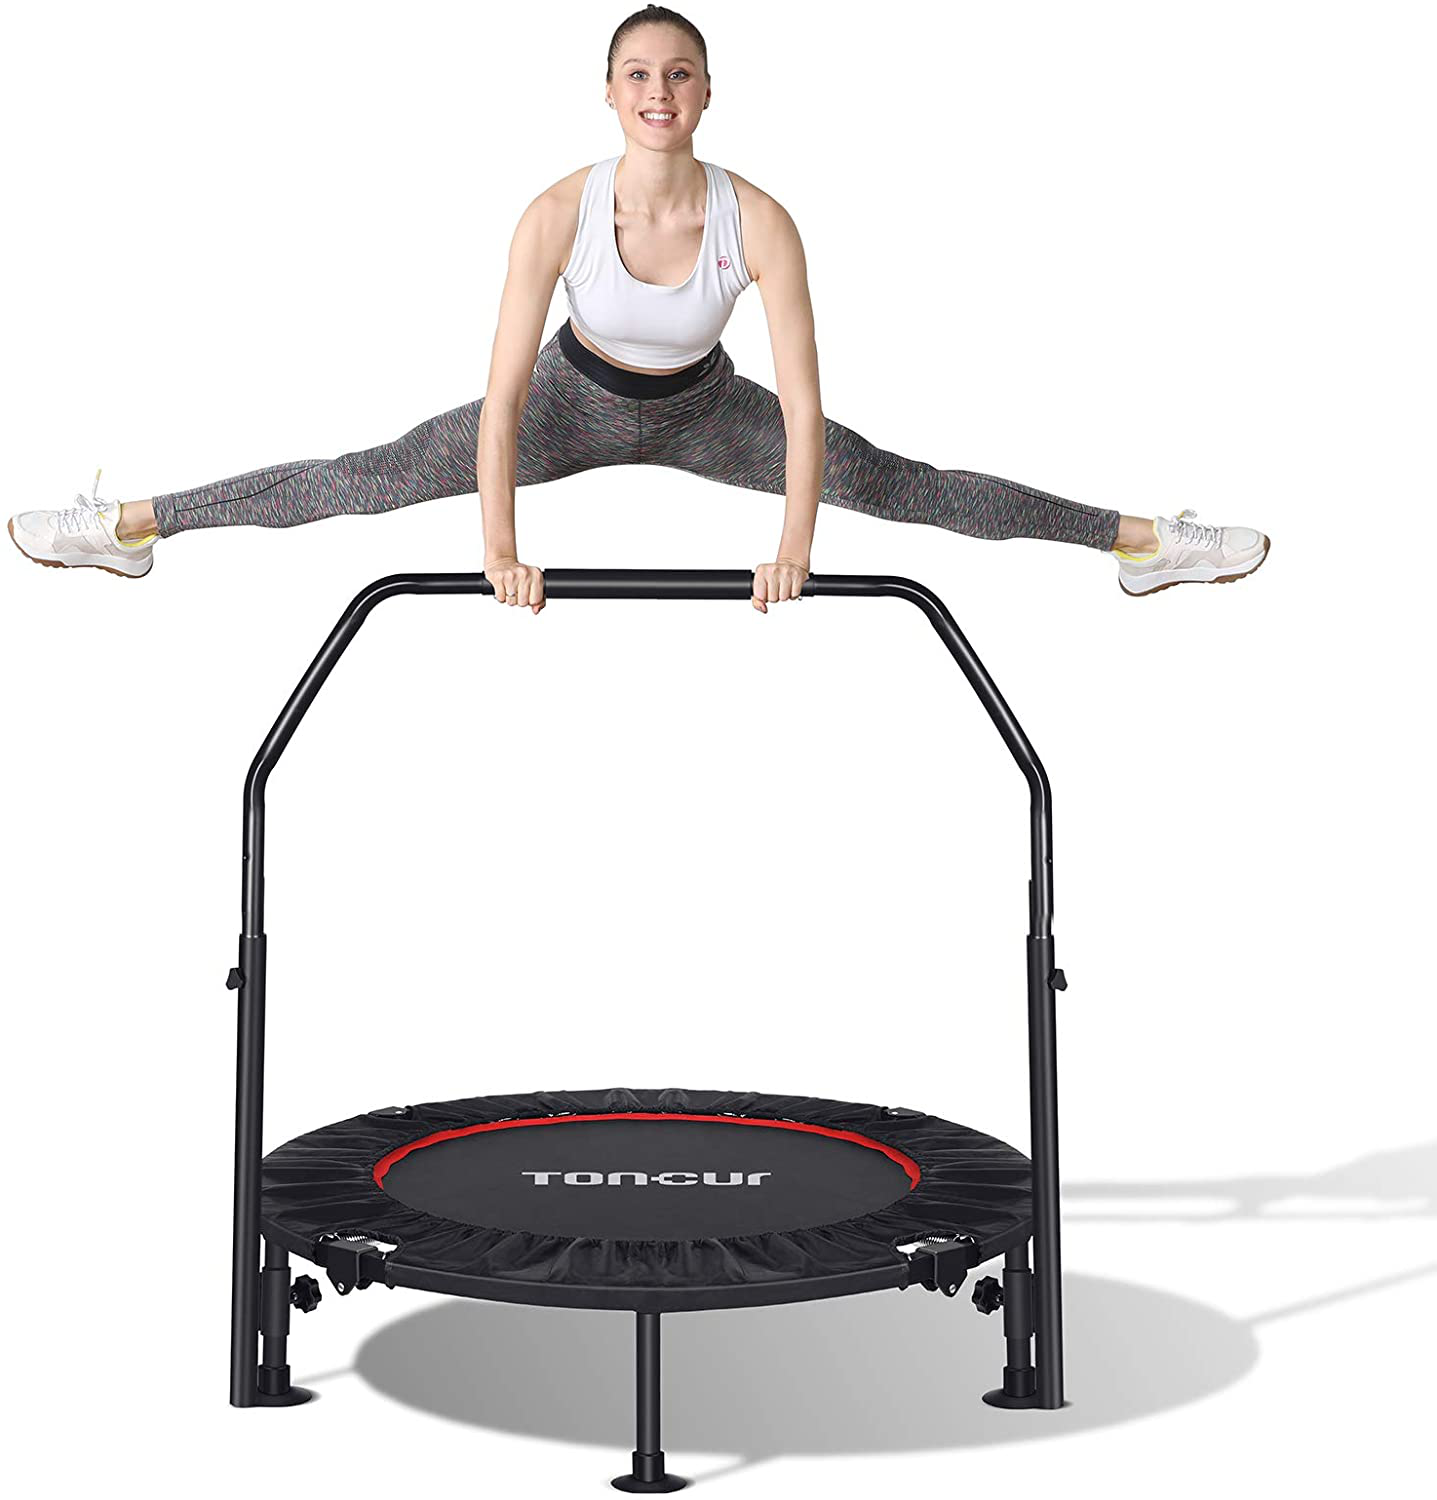 BCAN 40 Foldable Mini Trampoline, Fitness Rebounder with Adjustable Foam  Handle, Exercise Trampoline for Adults Indoor/Garden Workout Max Load 330lbs